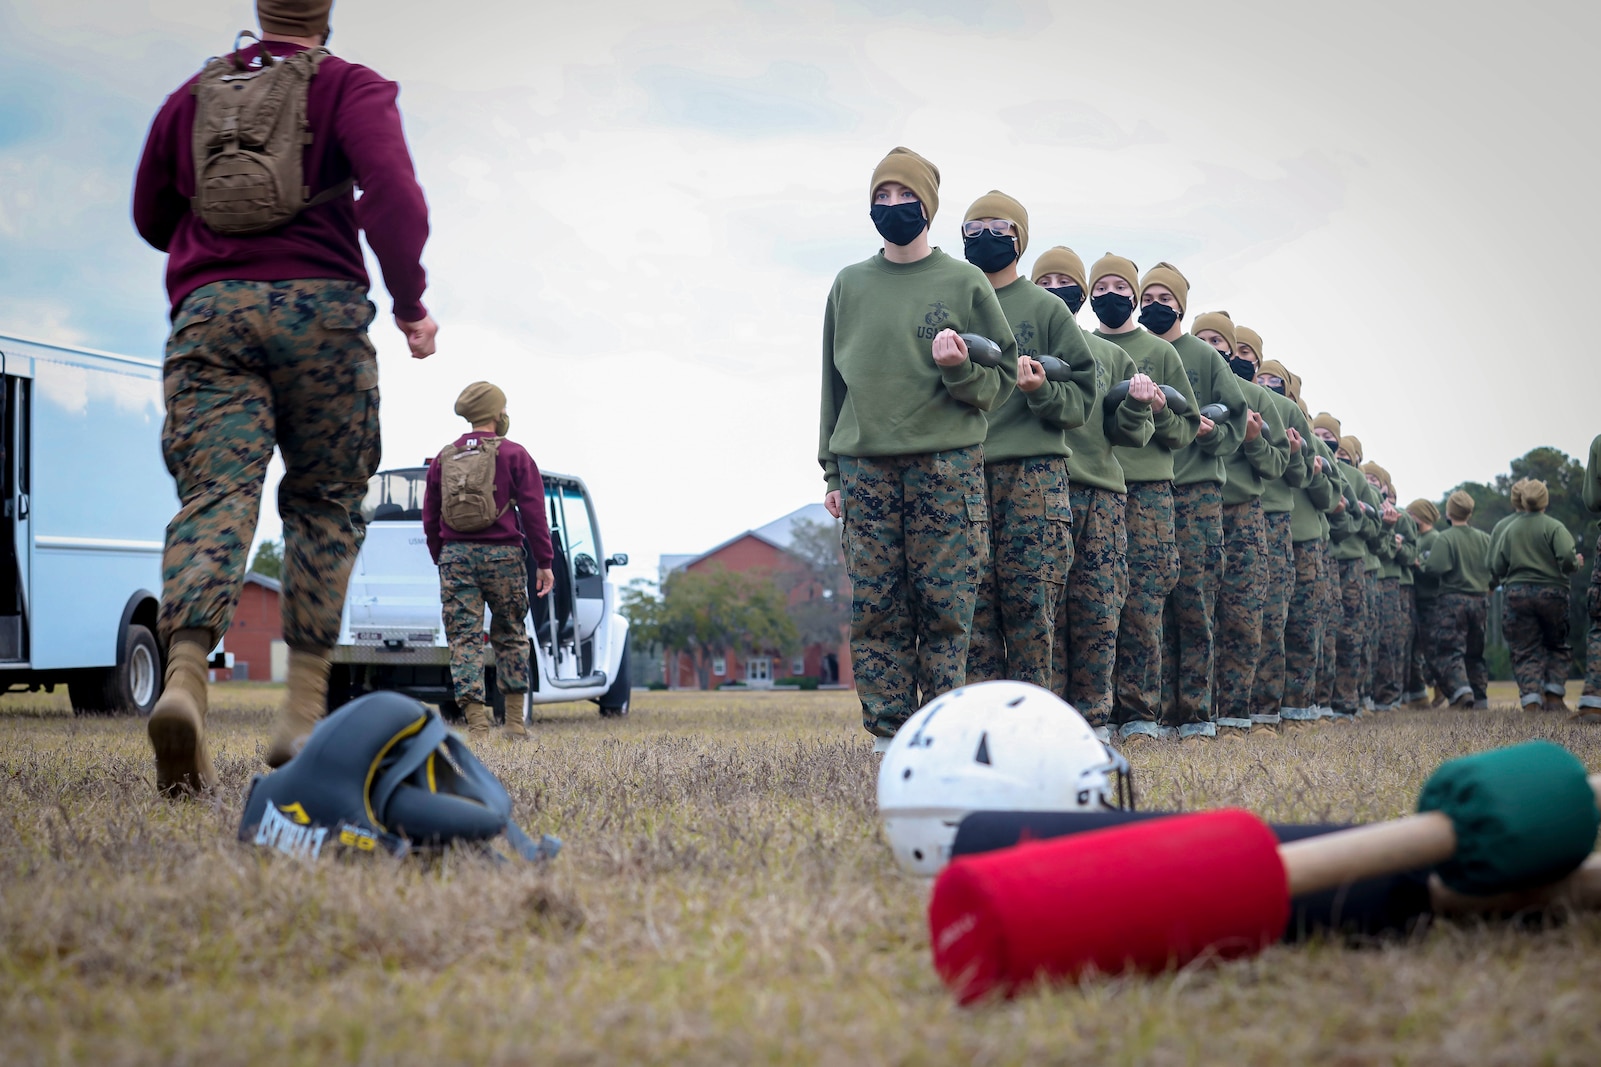 Recruits with Papa Company, 4th Recruit Training Battalion, prepare to conduct pugil sticks bouts aboard Marine Corps Recruit Depot Parris Island, S.C. Jan. 11, 2021. Pugil sticks help recruits practice the fundamentals of Marine Corps Martial Arts. (U.S. Marine Corps photo by Cpl. Dylan Walters)